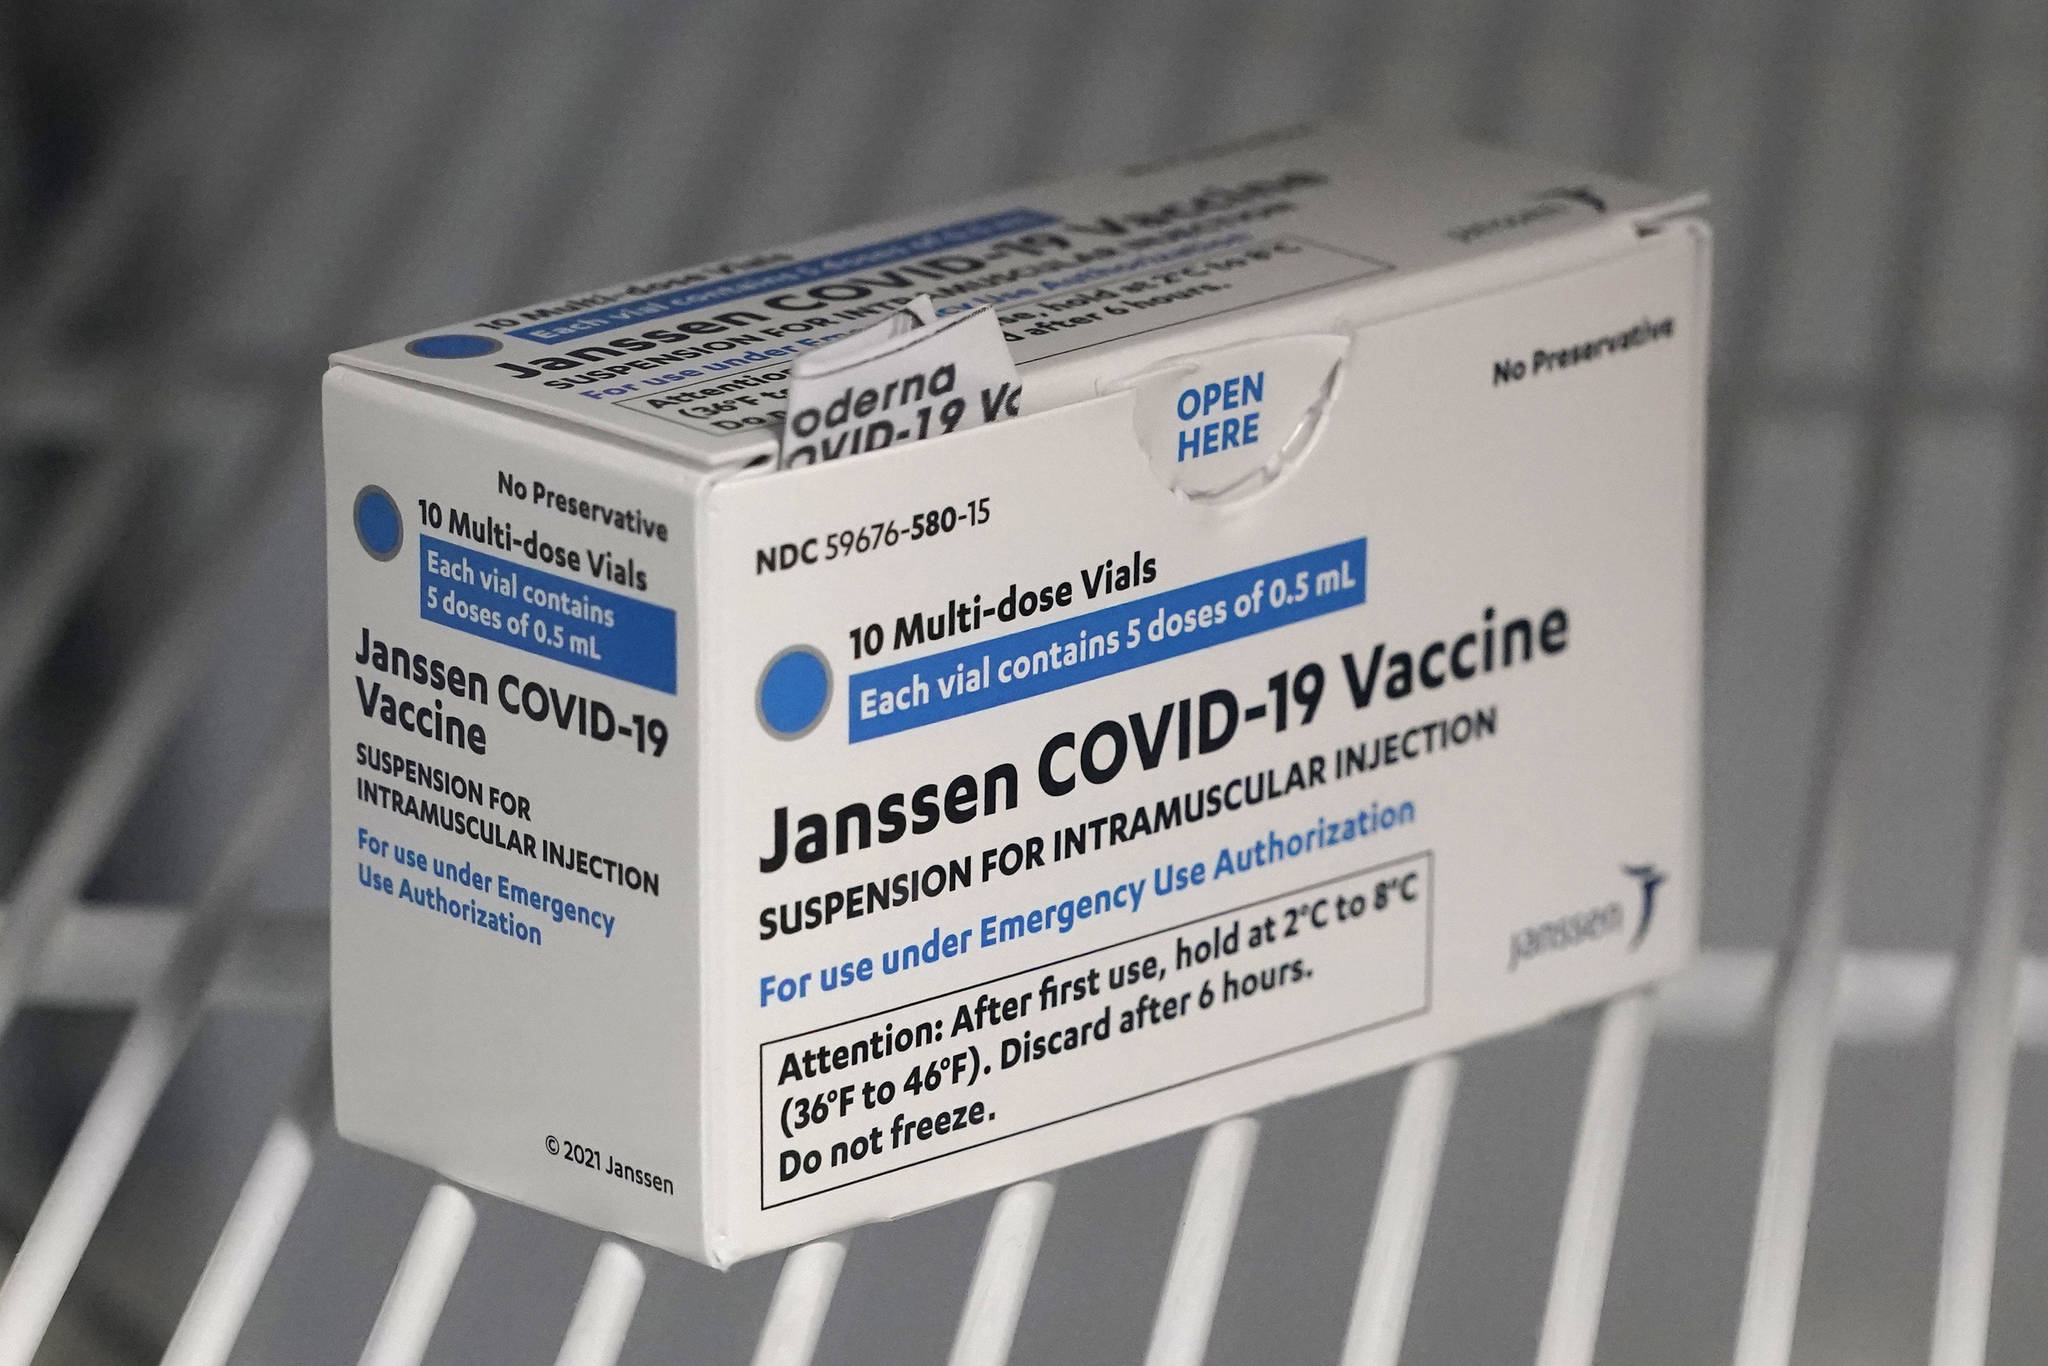 In this March 25 file photo, a box of the Johnson & Johnson COVID-19 vaccine is shown in a refrigerator at a clinic in Washington state. (AP Photo/Ted S. Warren)